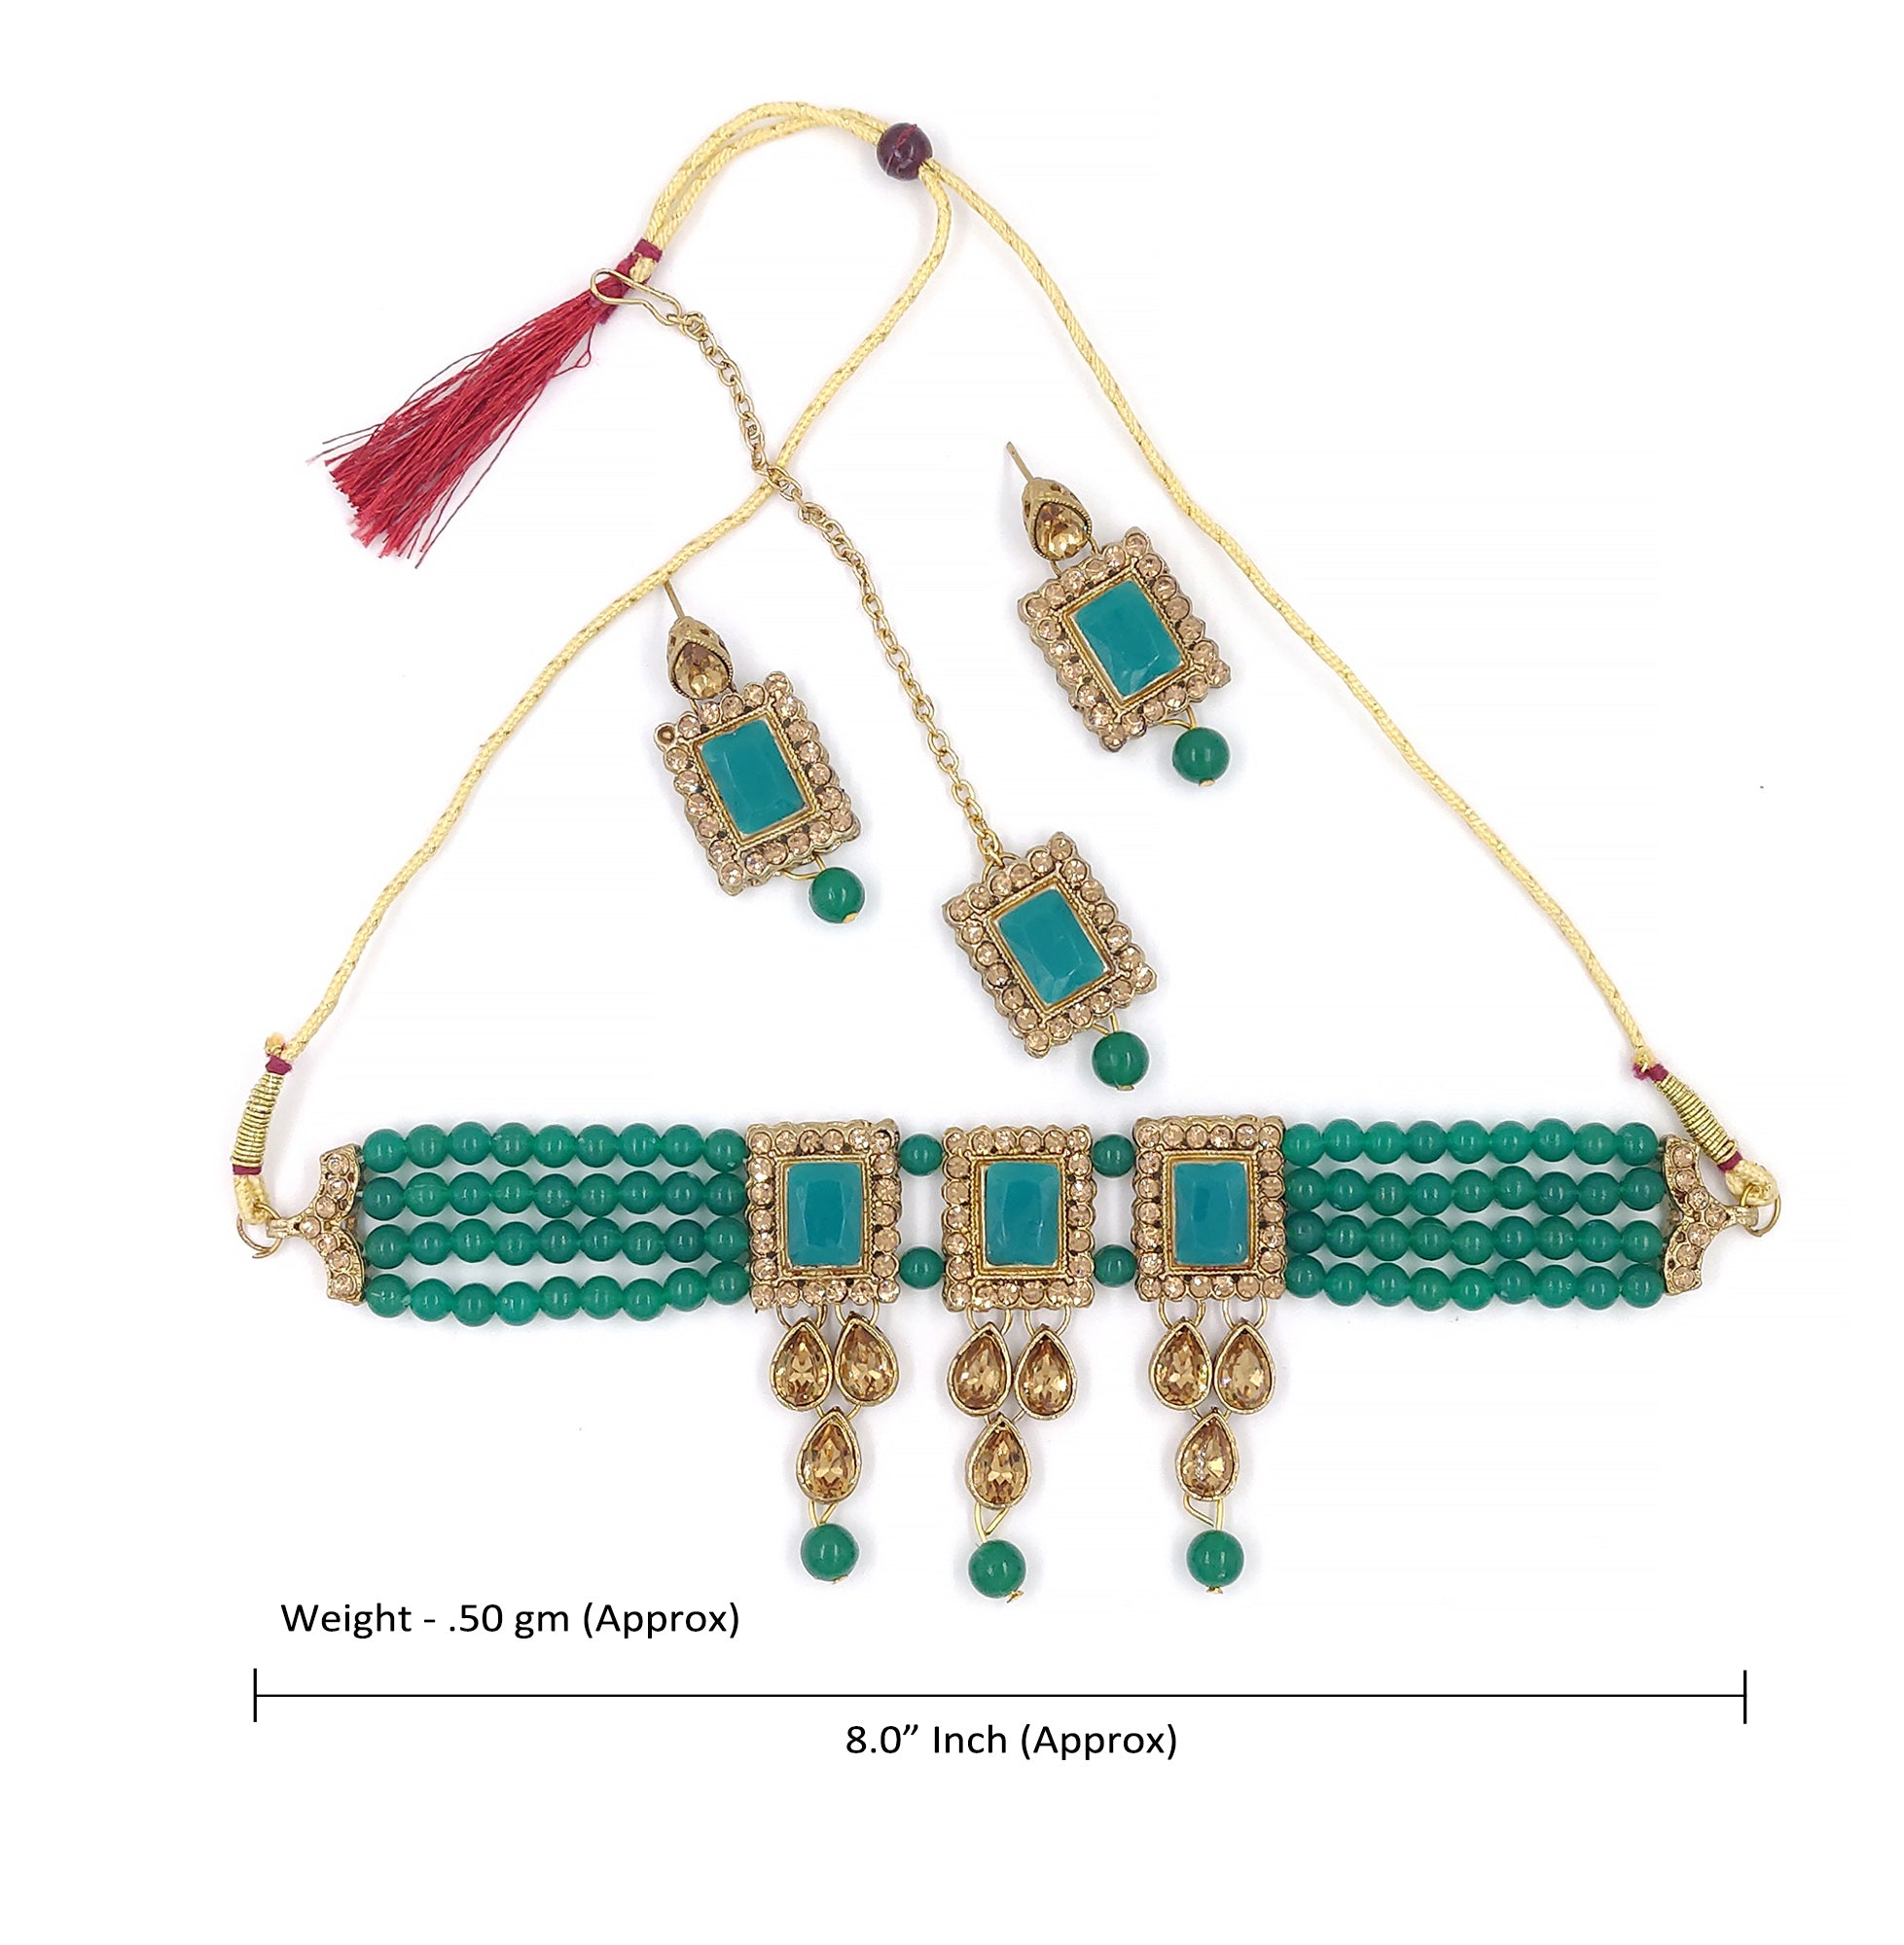 Women's Multistrand Dark Green Beads And Stones Traditional Choker Necklace & Maang Tikka  - Zaffre Collections